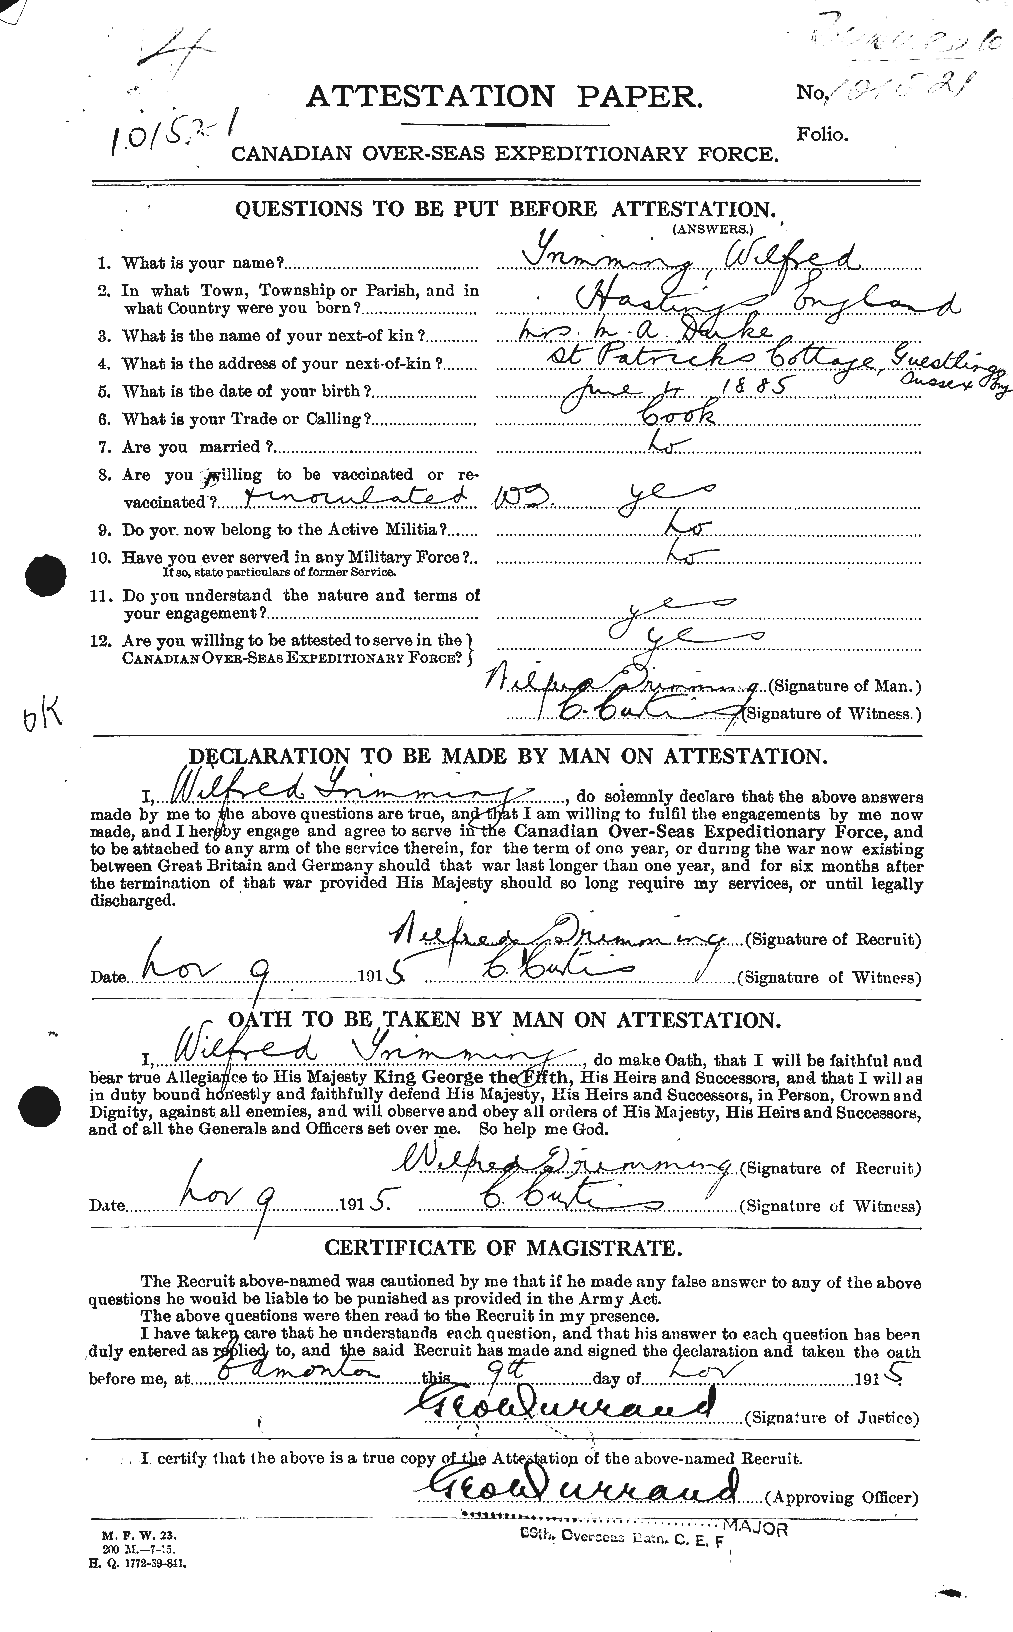 Personnel Records of the First World War - CEF 639268a